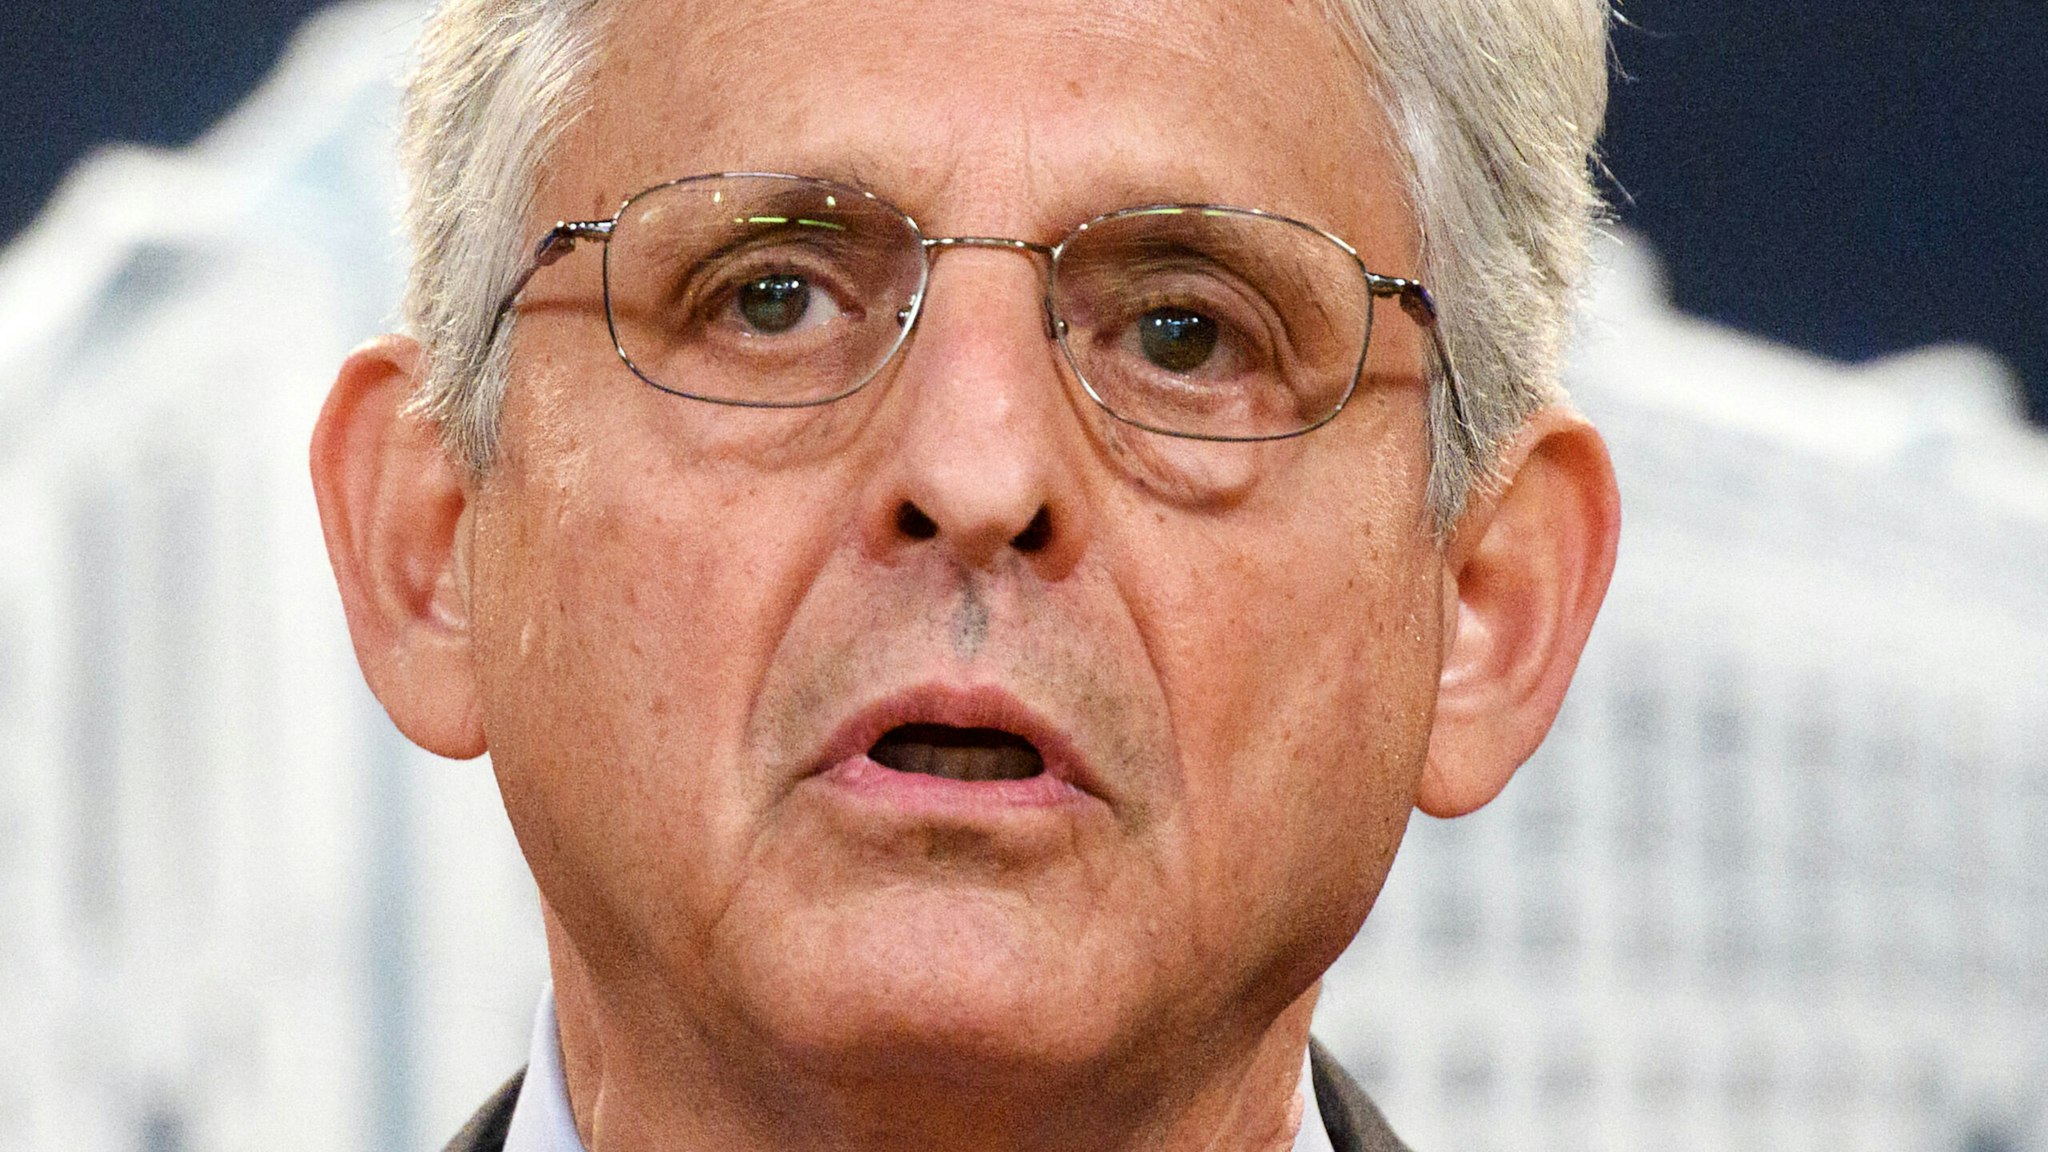 US Attorney General Merrick Garland holds a press conference to announce a lawsuit against Texas at the Department of Justice in Washington, DC on September 9, 2021 - The US Justice Department filed suit against the state of Texas on Thursday over its new law that bans abortions after six weeks of pregnancy.